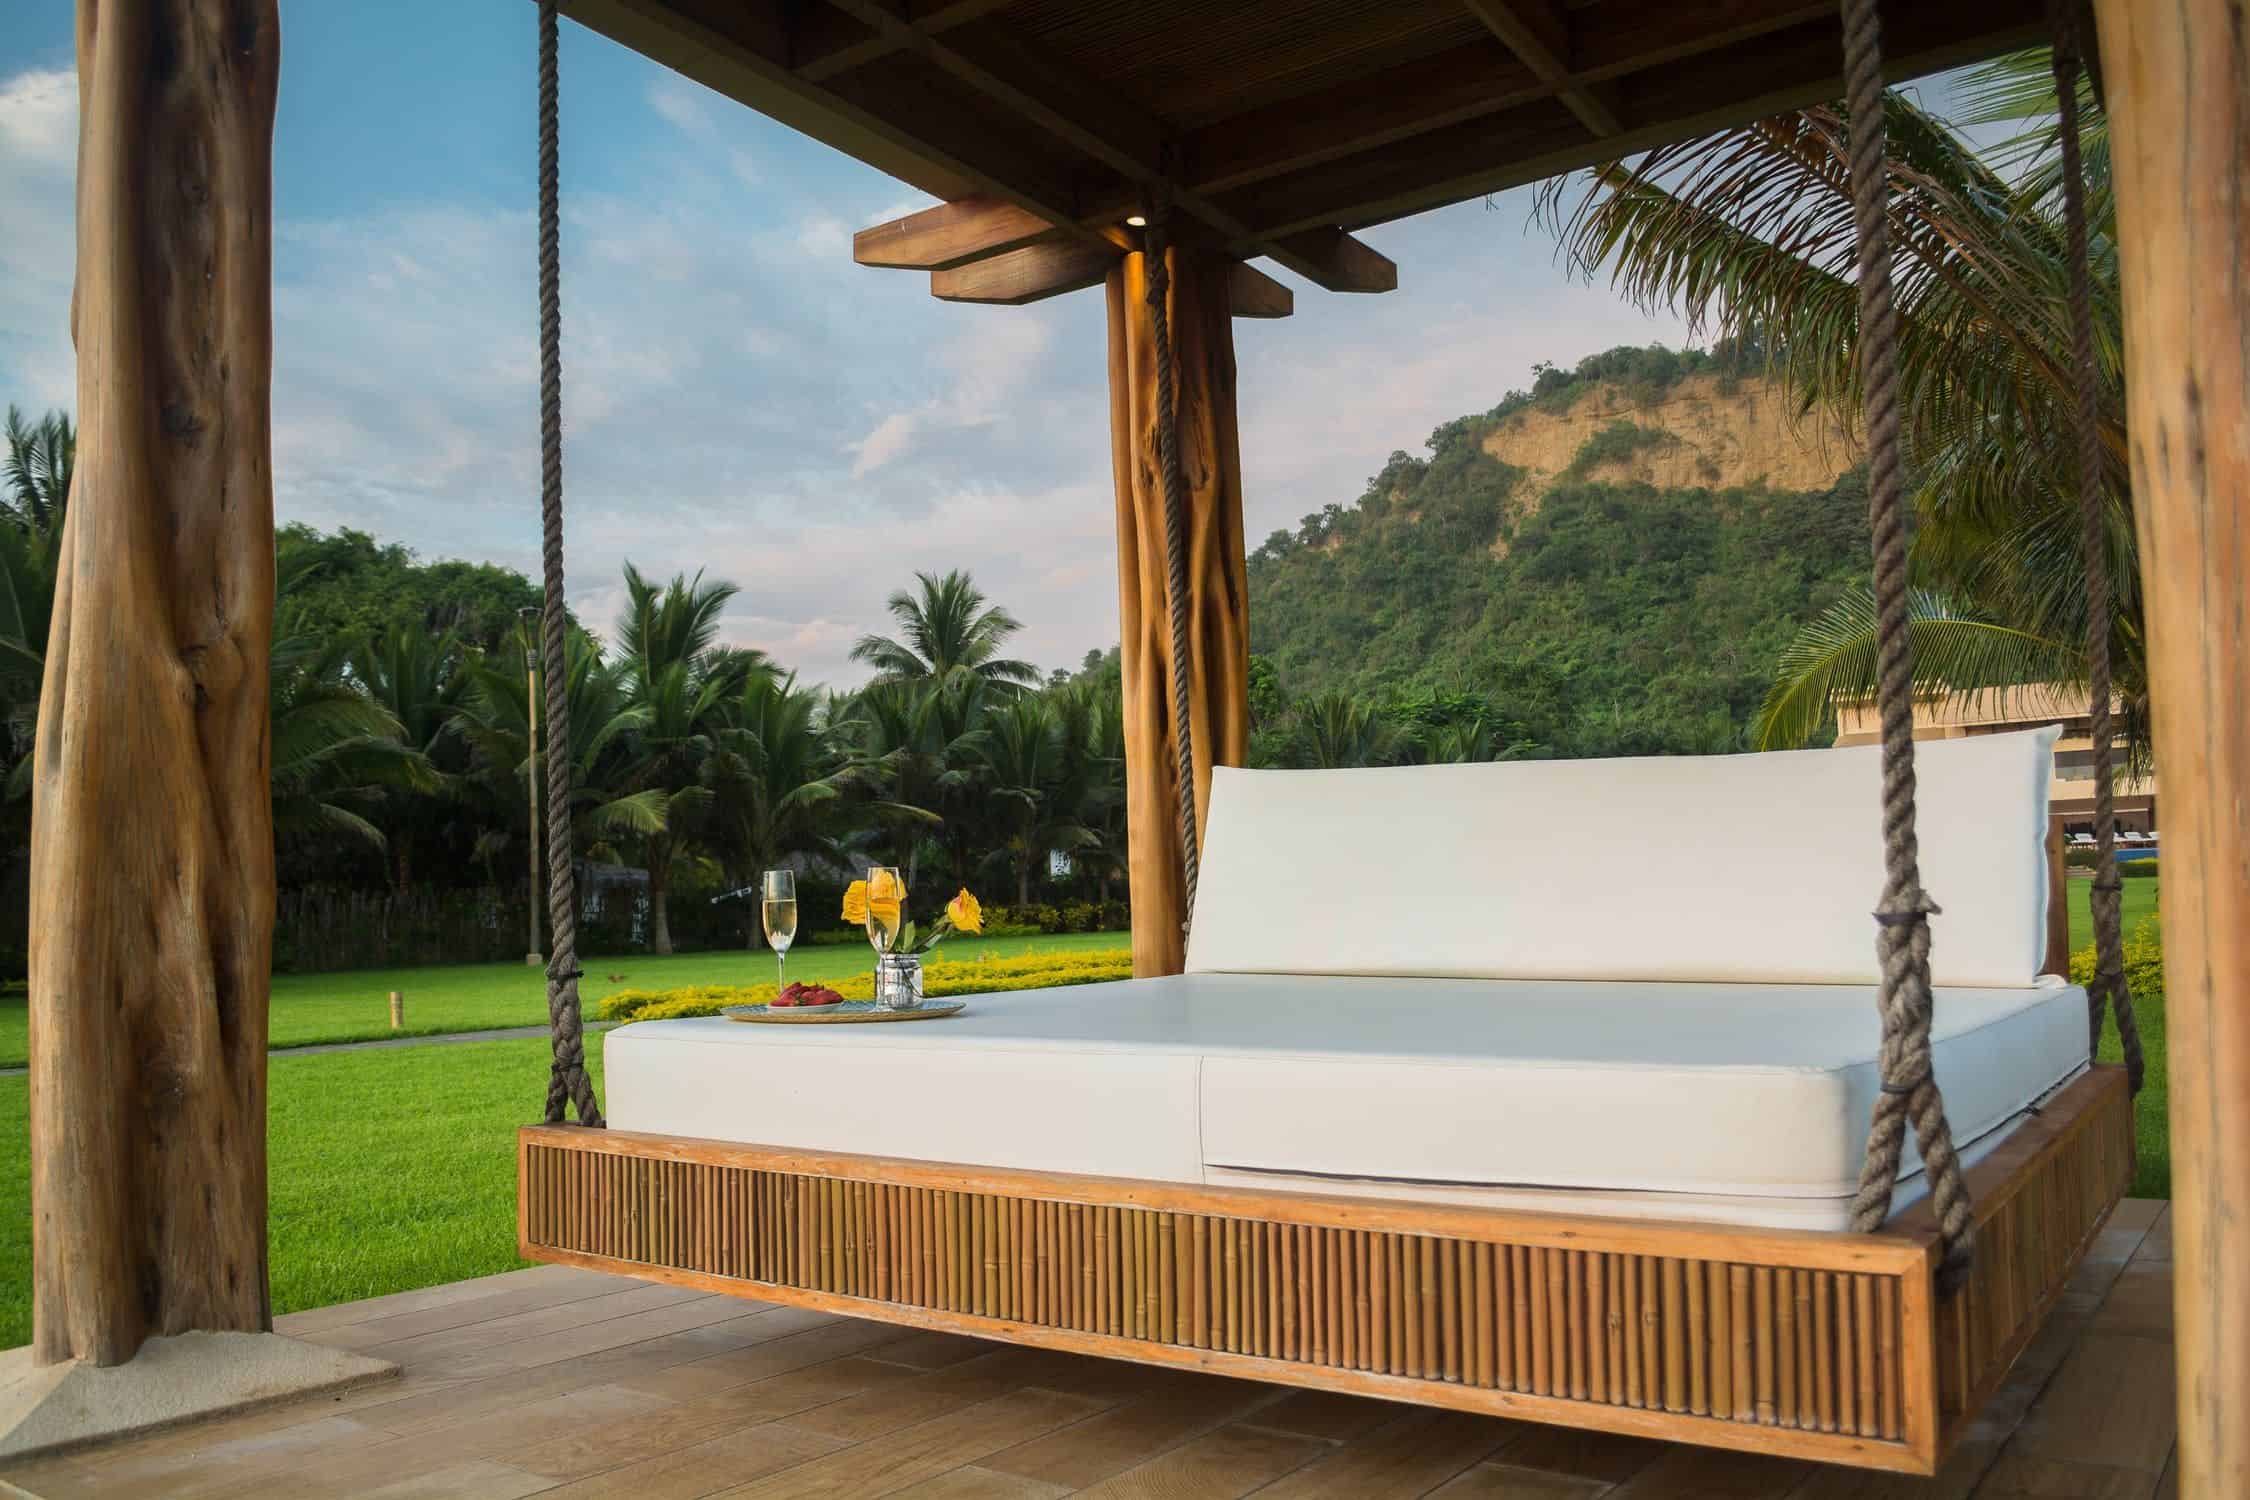 How to waterproof a mattress for outdoors: an outdoor bed